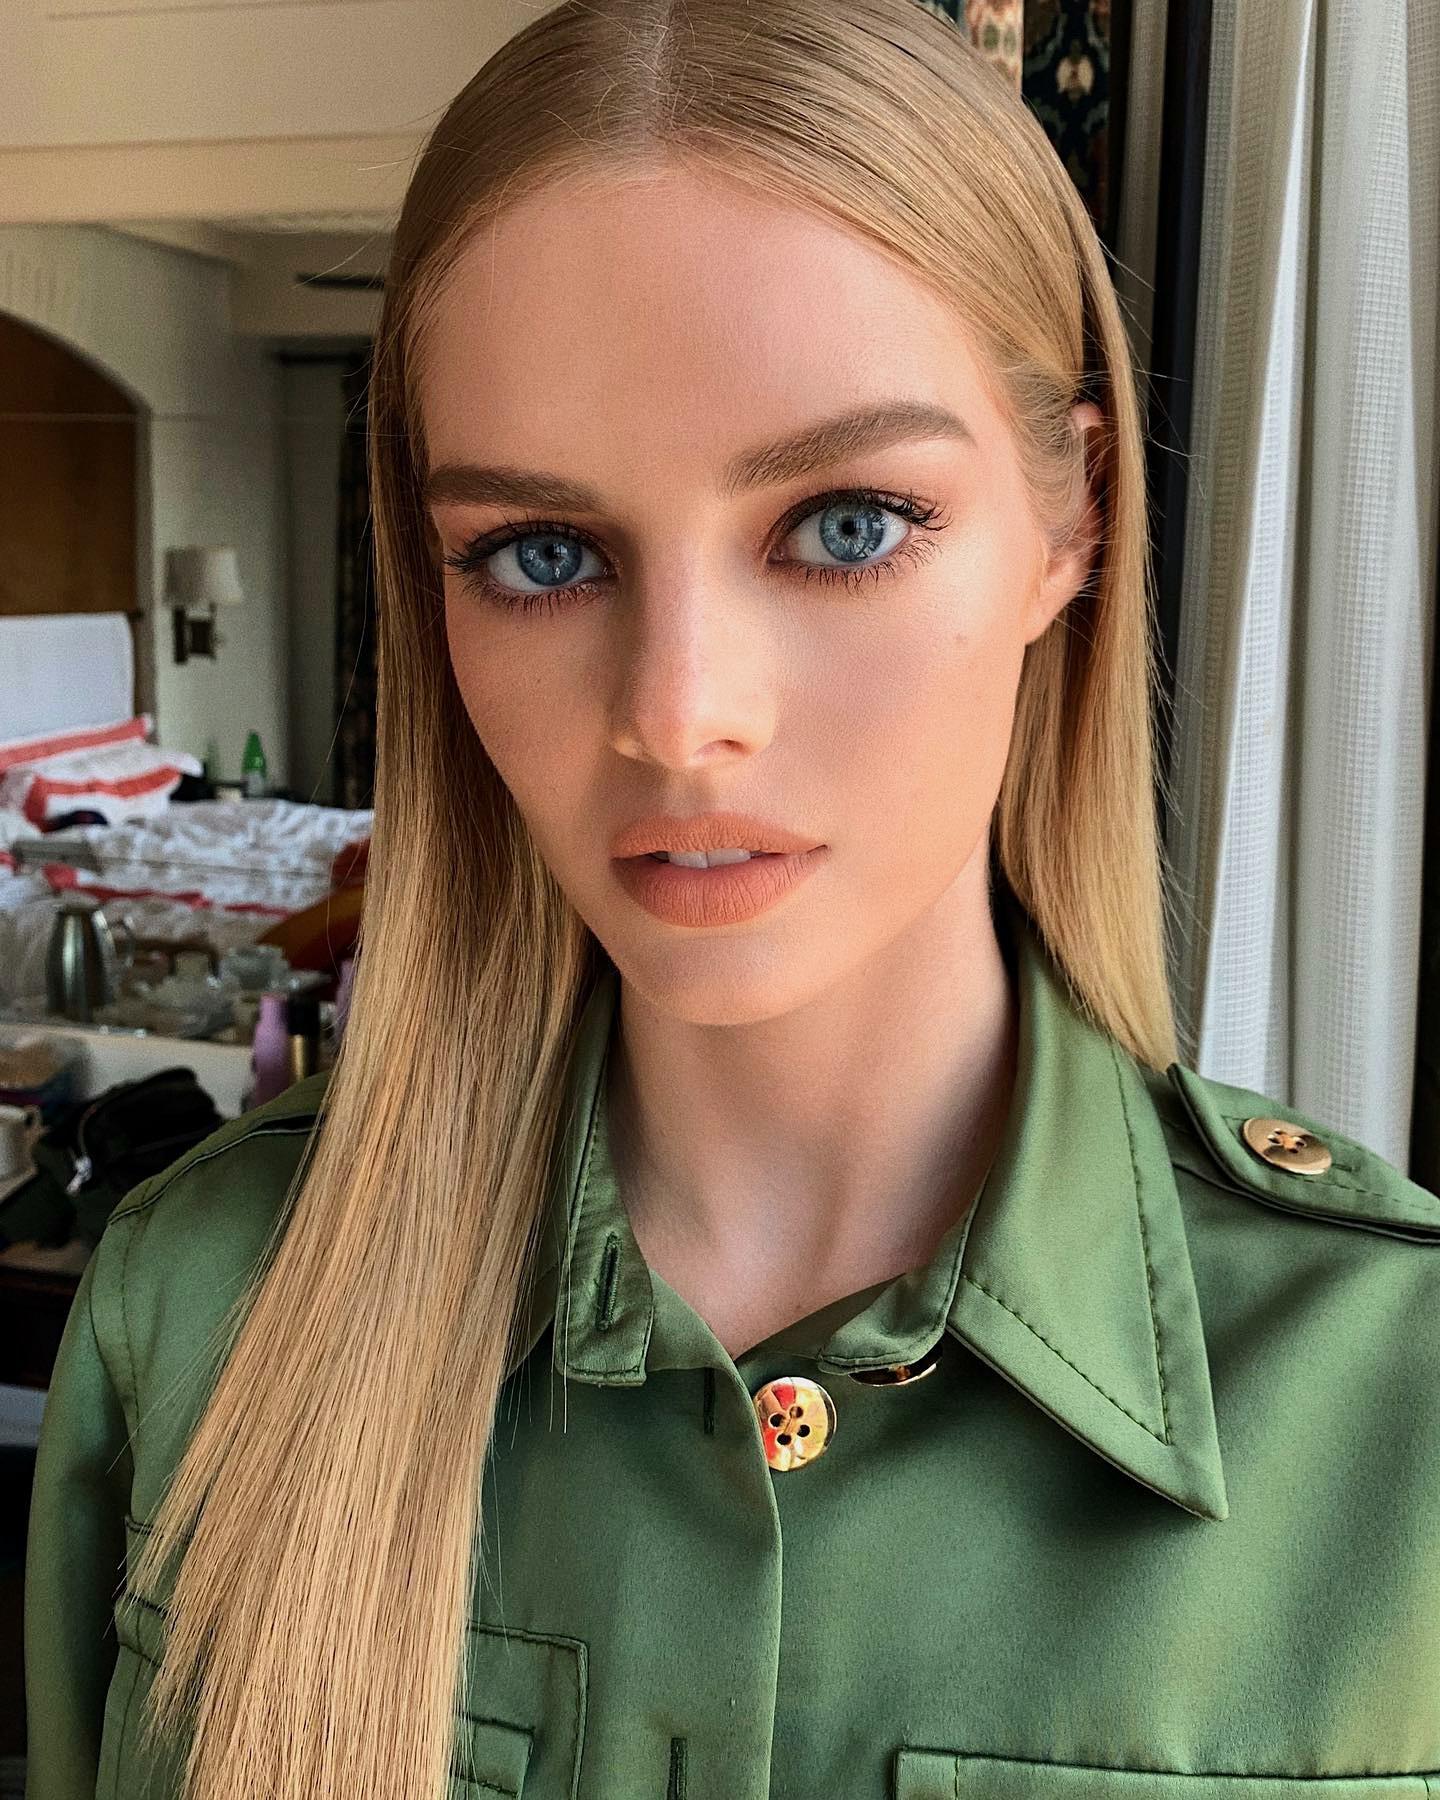 Samara Weaving Has Those Perfect Blowjob Eyes That Would Stare Deep Into Your Soul 🤤 Scrolller 